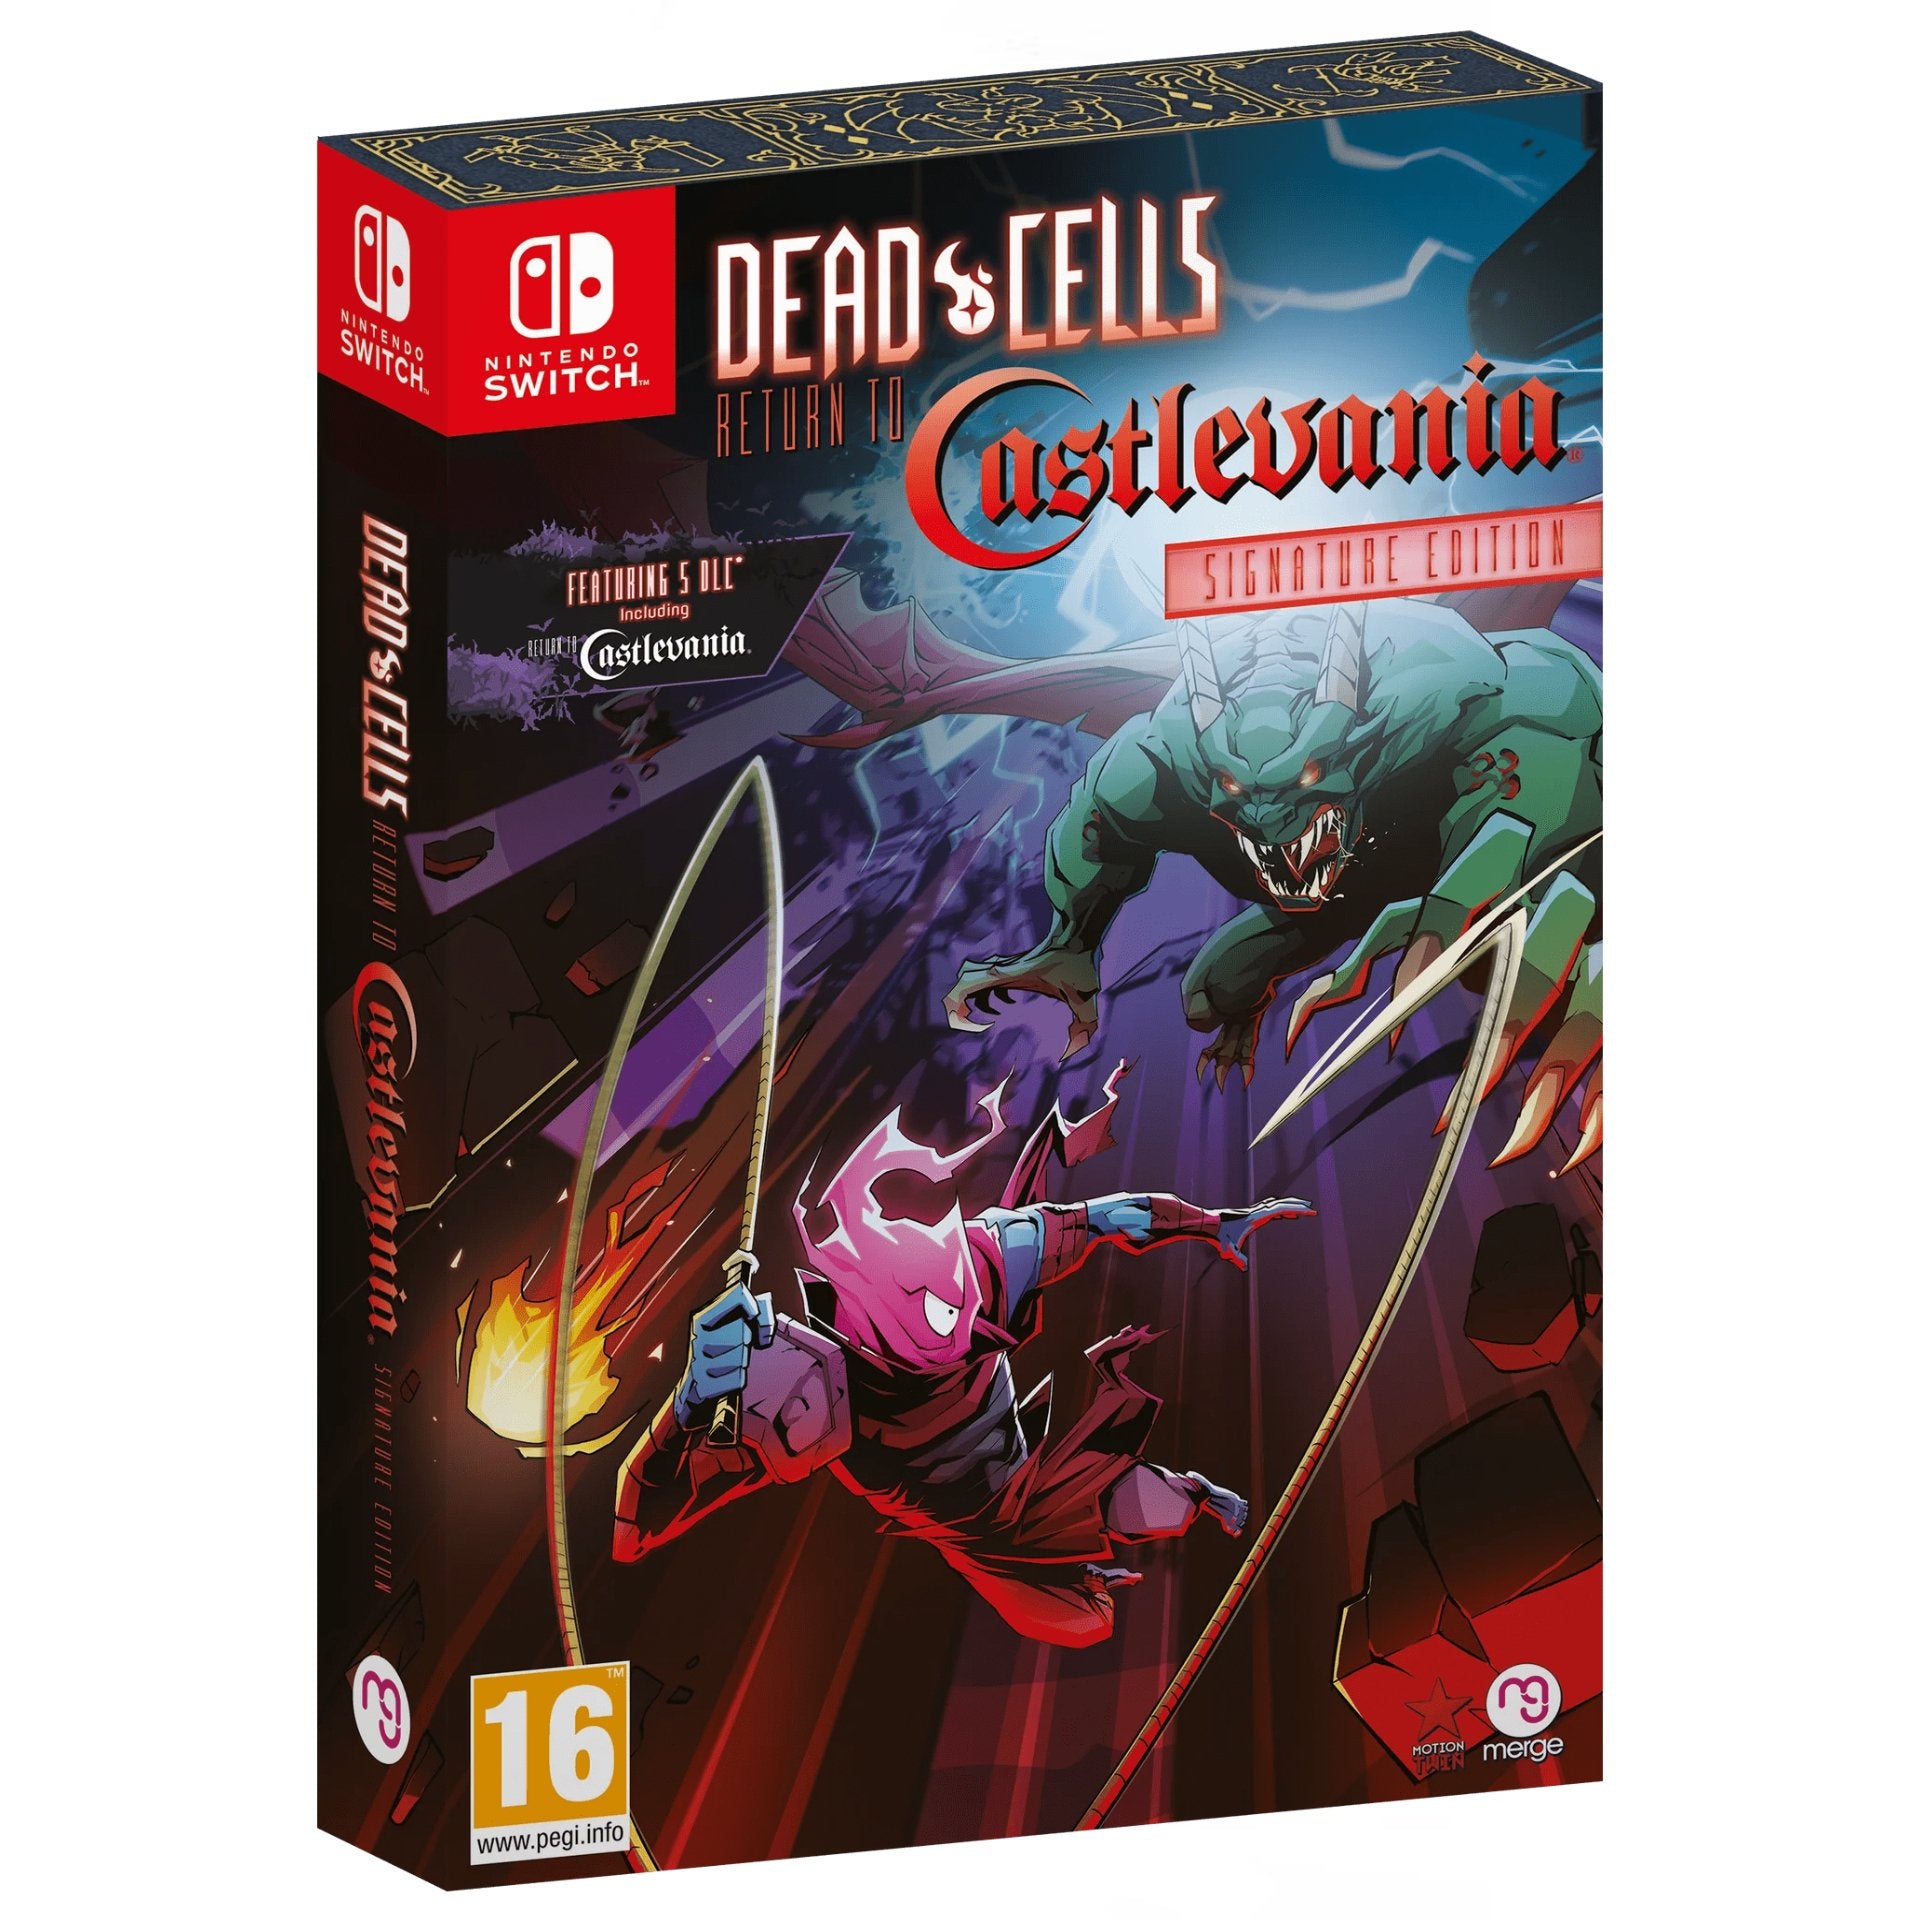 DEAD CELLS RETURN TO CASTLEVANIA LIMITED SIGNATURE EDITION